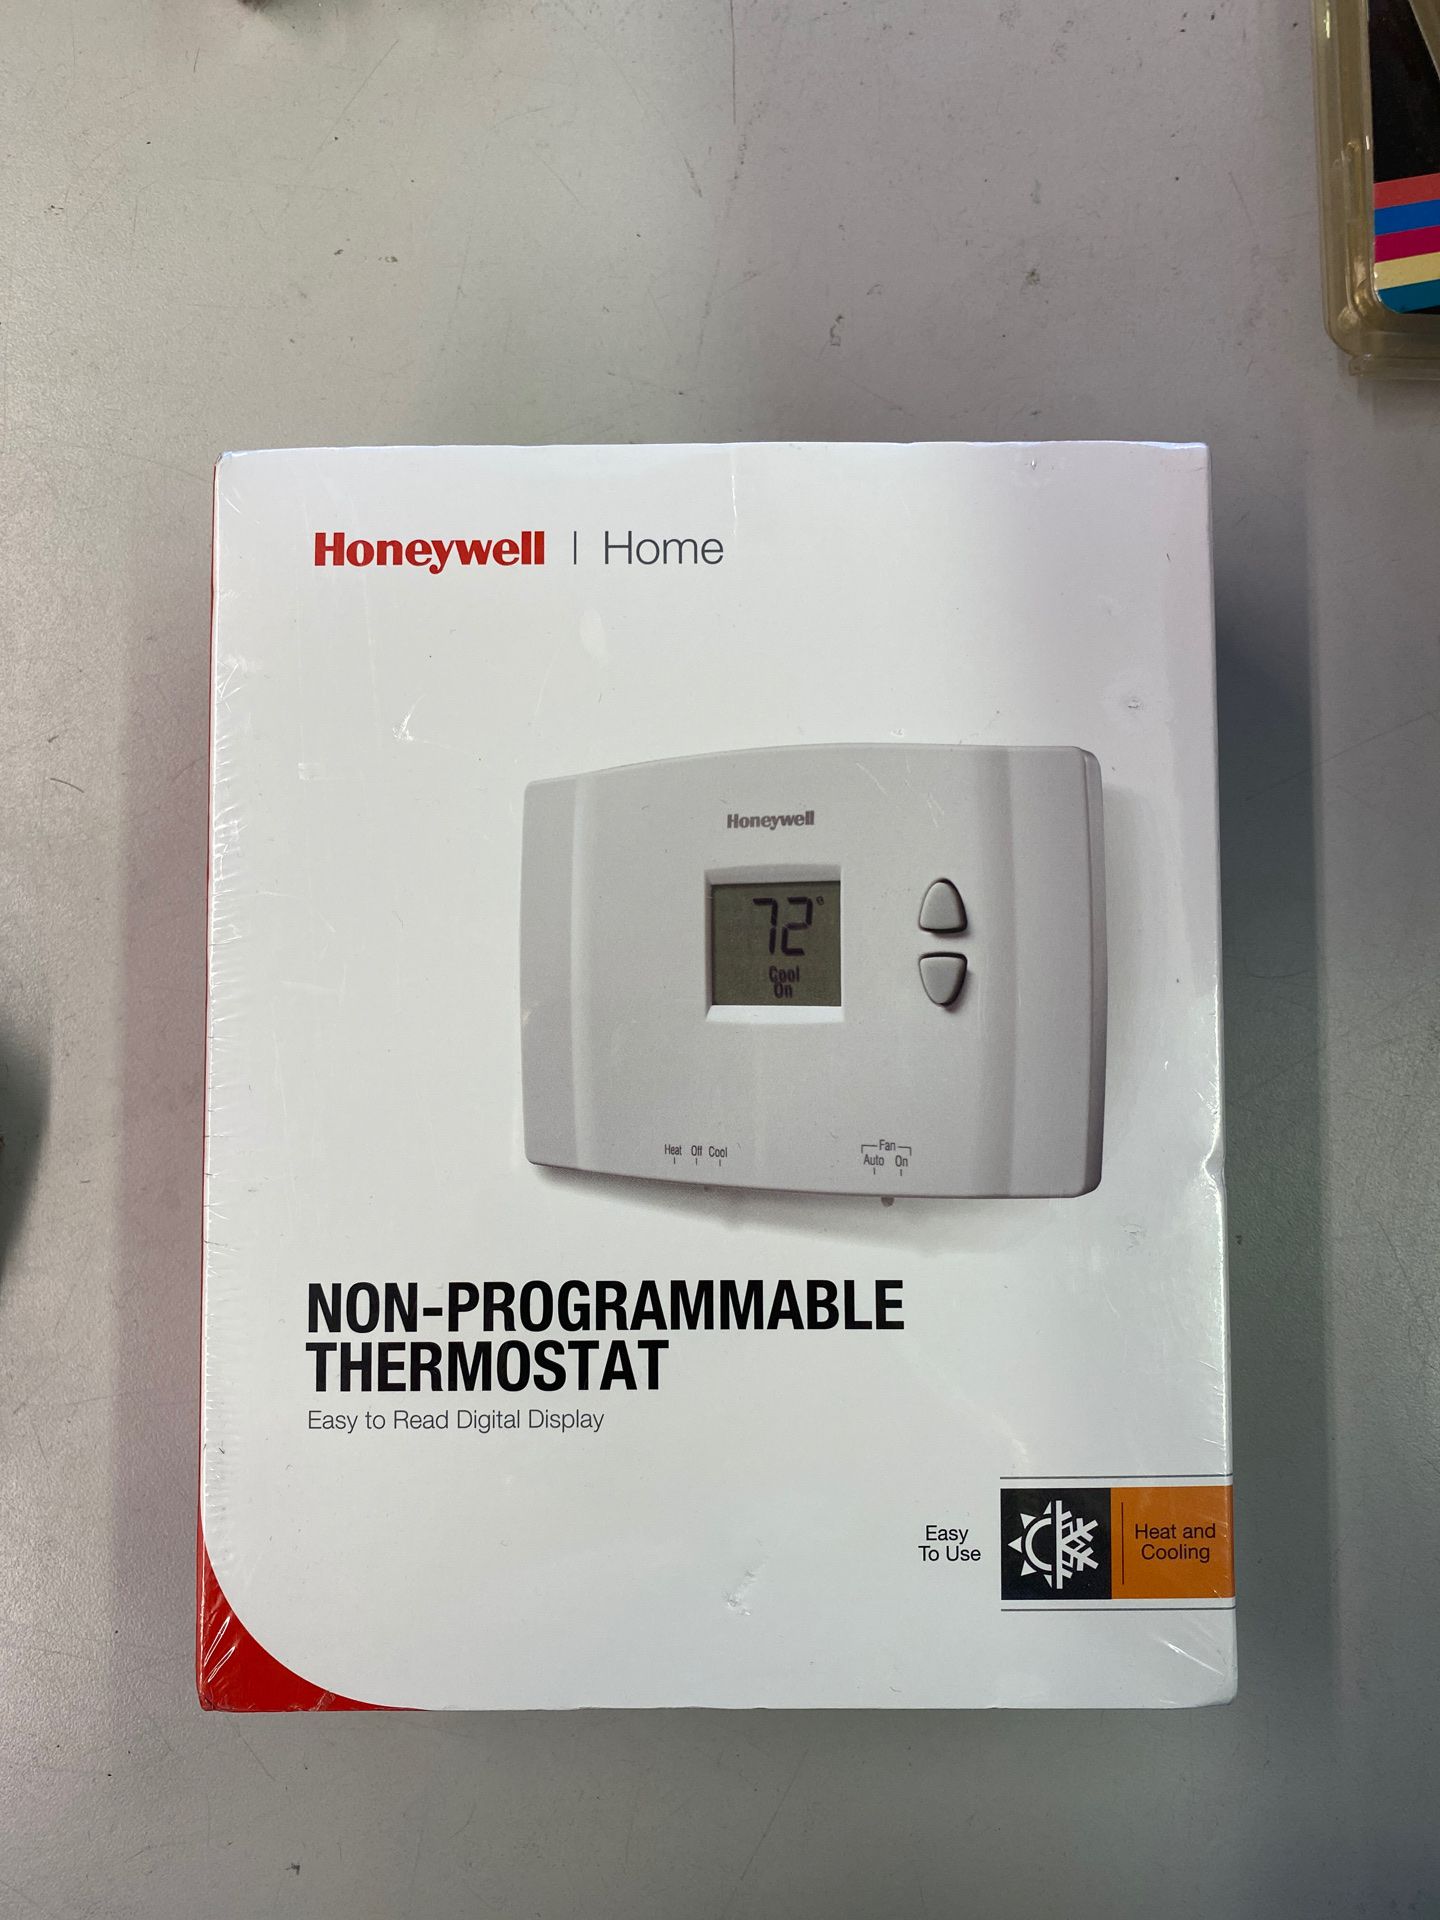 Non- programmable thermostat